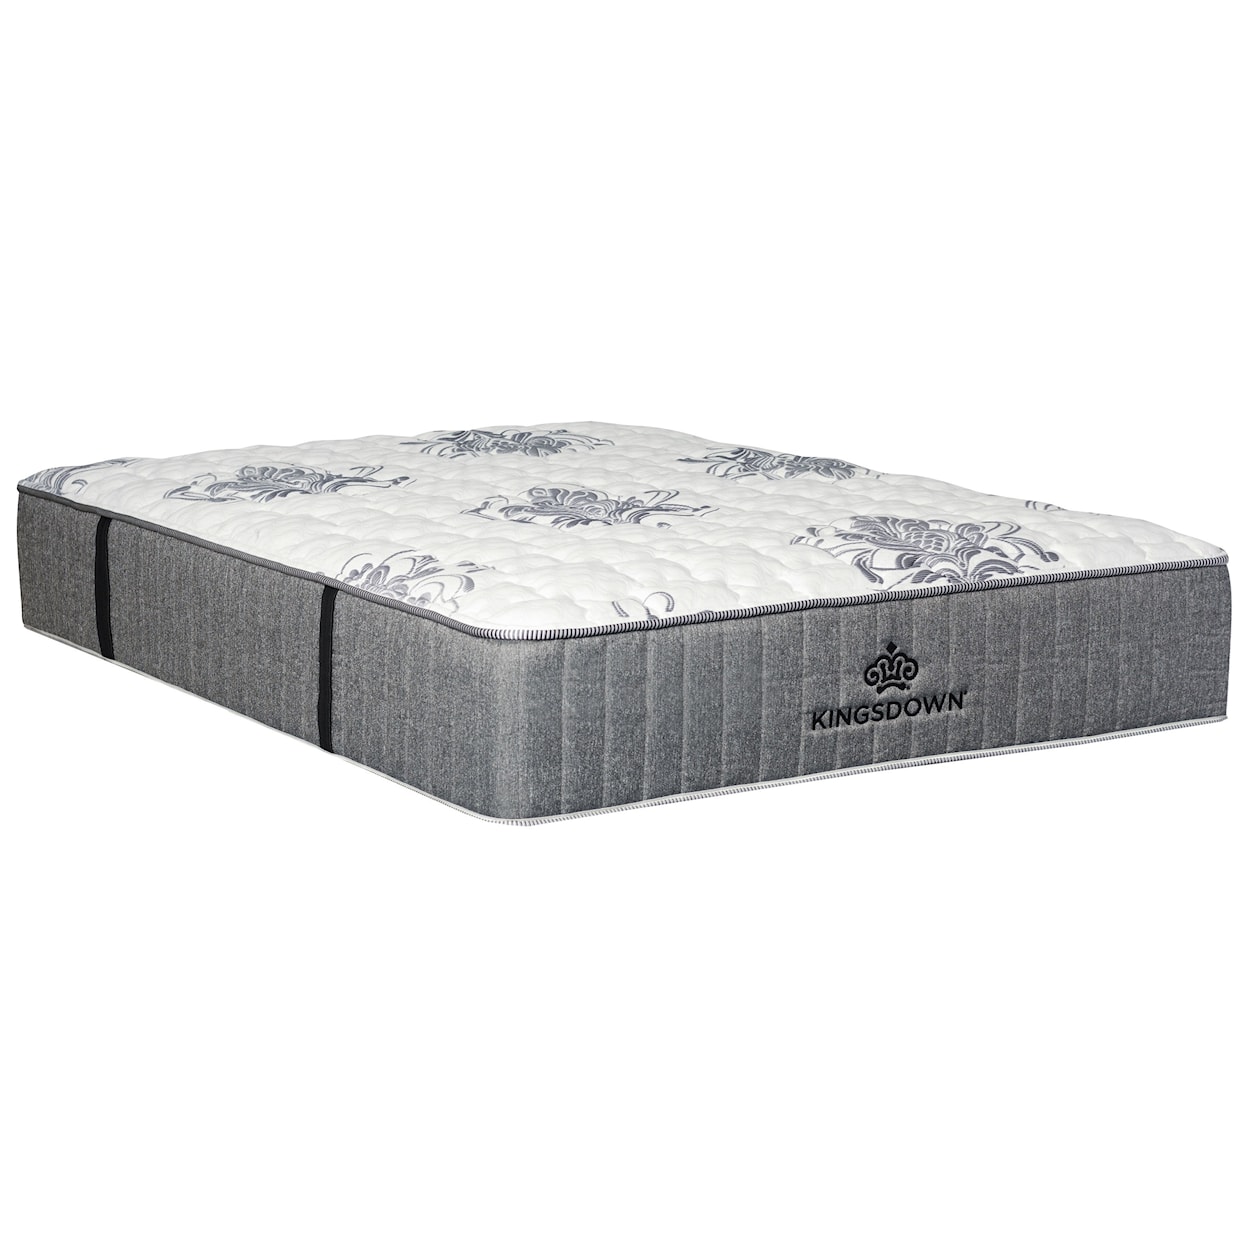 Kingsdown Passions Zest Firm Twin XL 14 1/2" Firm Coil on Coil Mattress